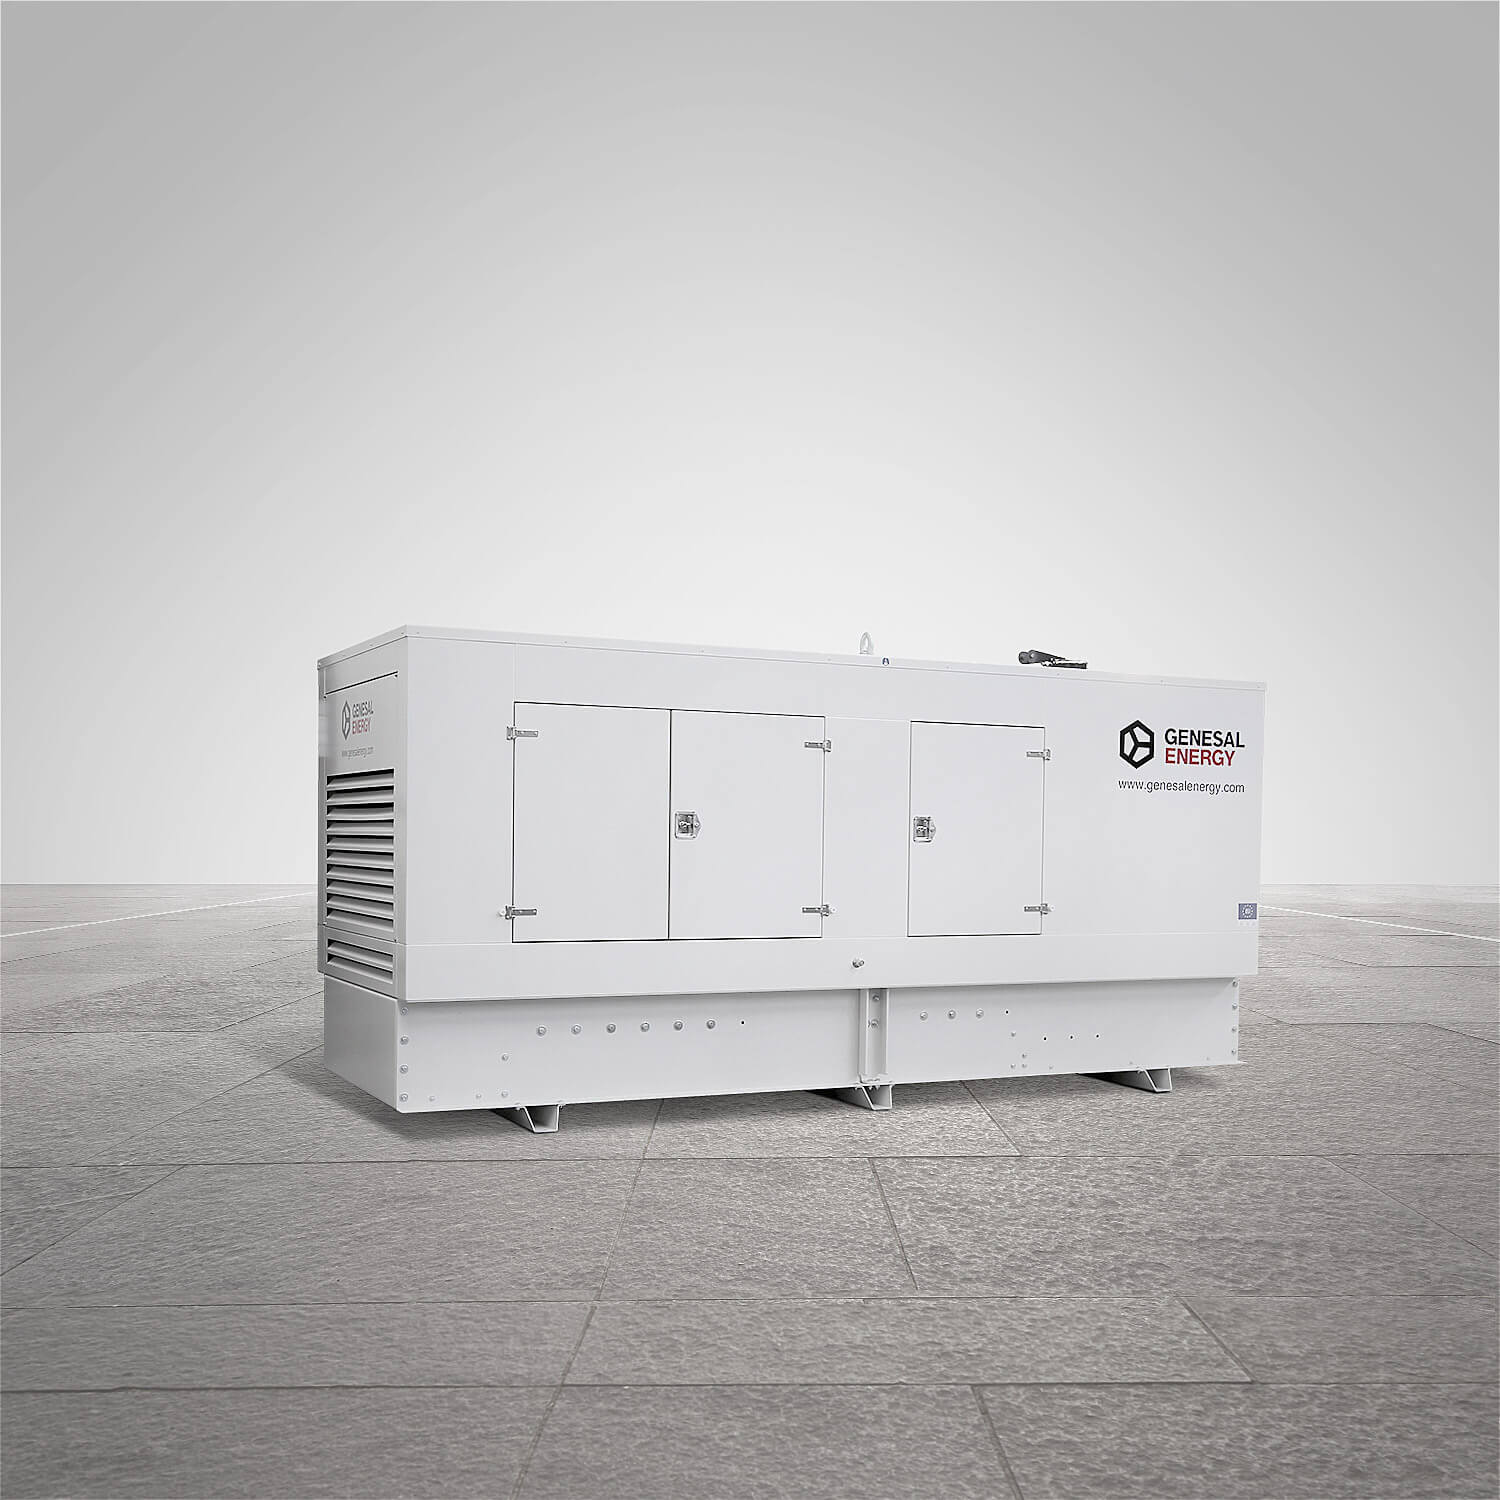 Made-to-measure power for a thermoelectric power plant in Sumatra